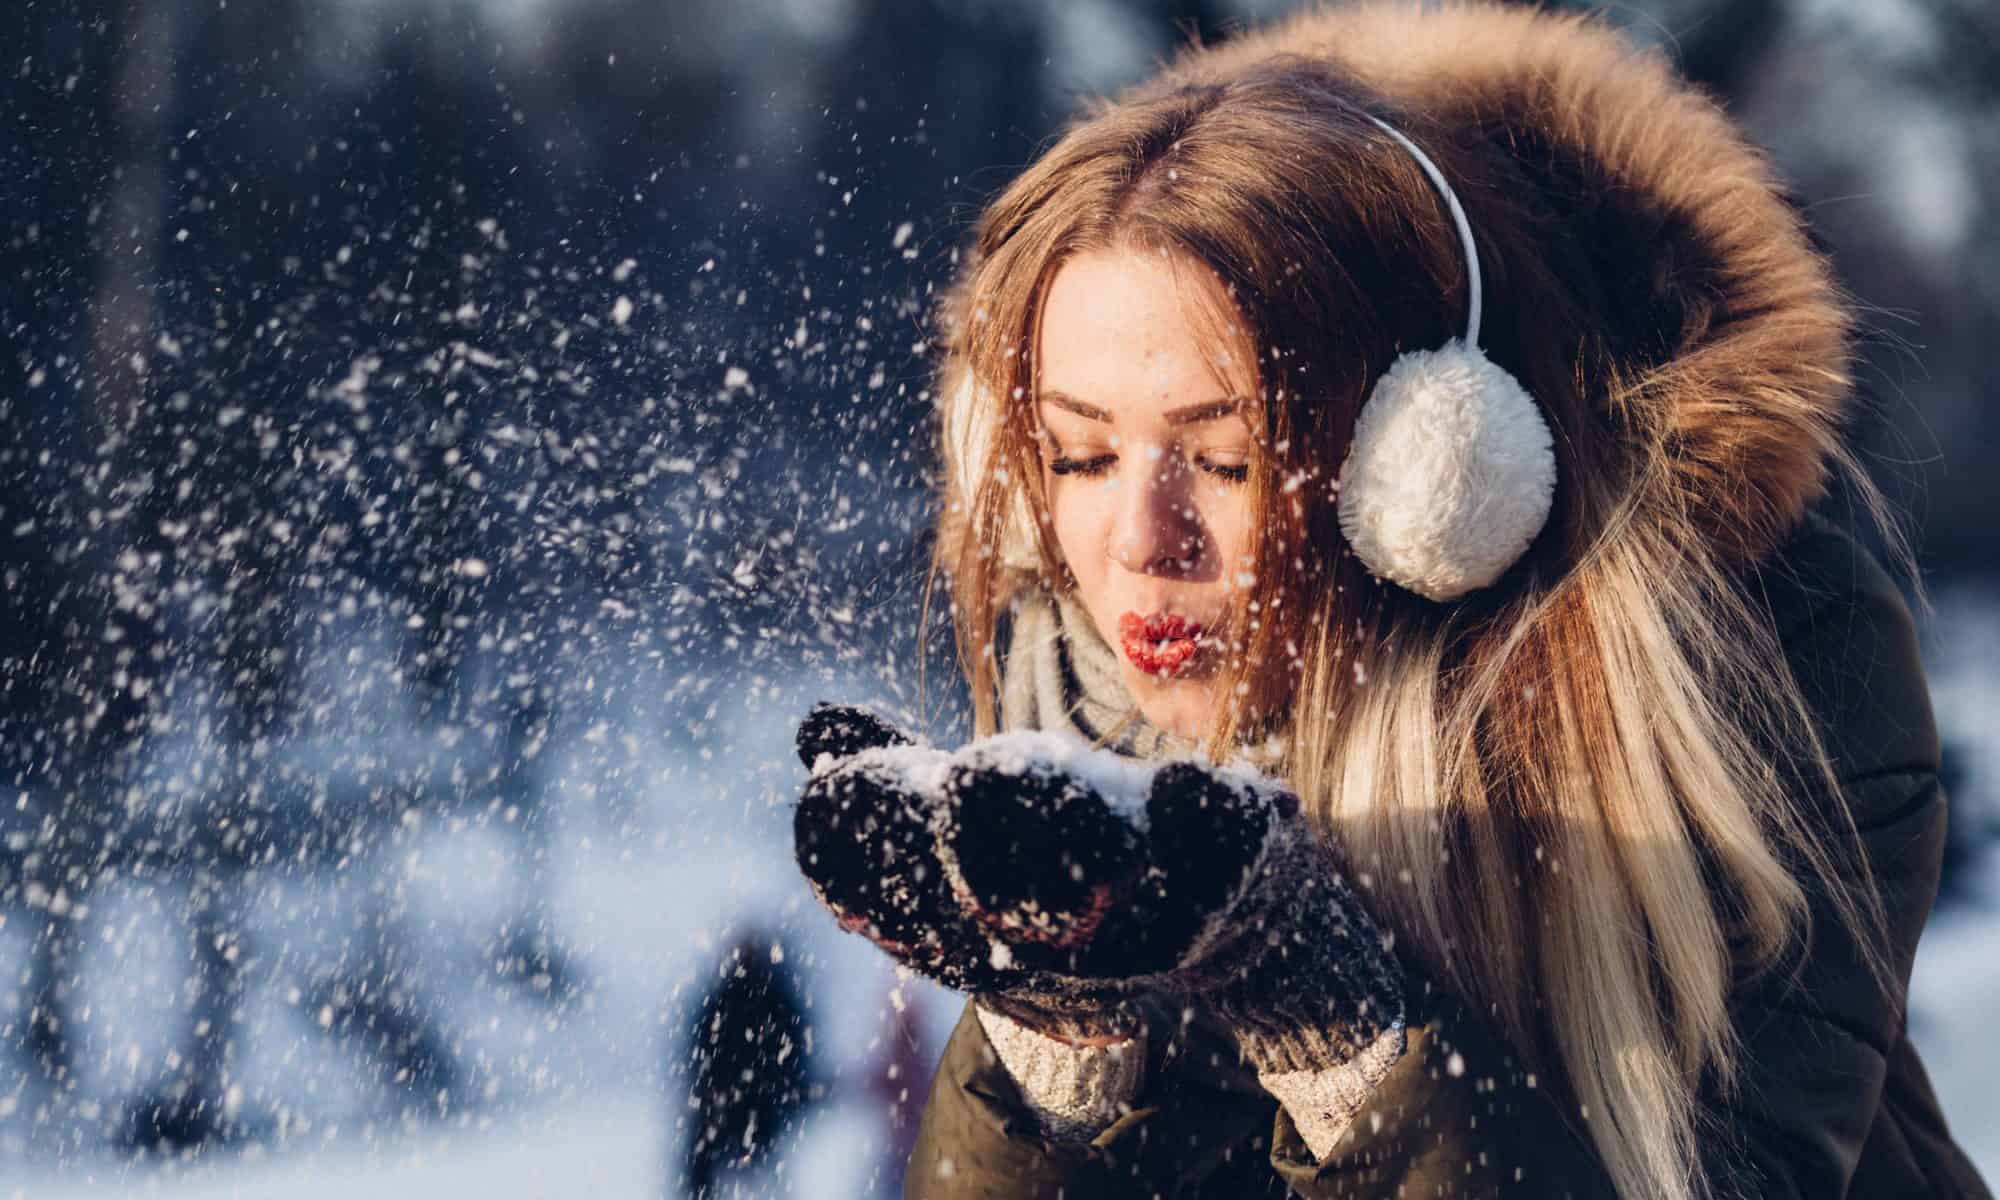 A woman with a large jacket and earmuffs blowing snow out of her hands.